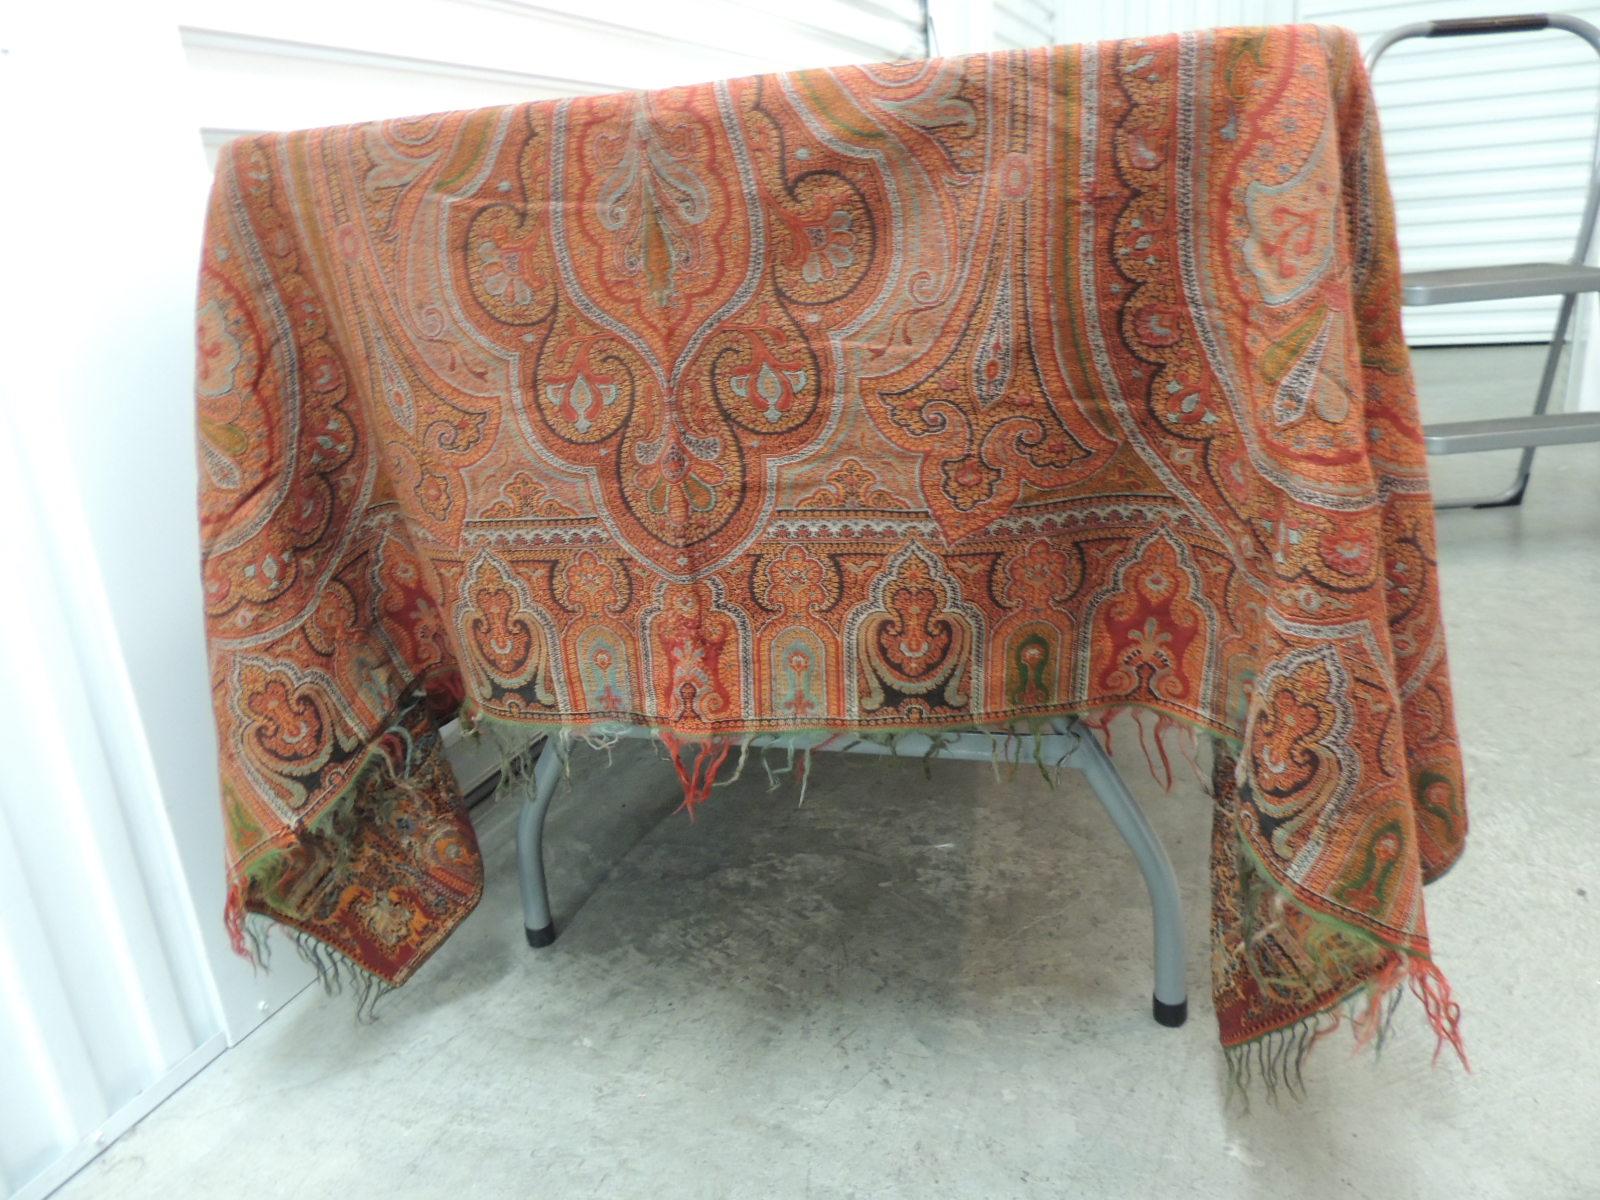 Hand-Crafted 19th Century Square Kashmir Paisley Shawl Tapestry